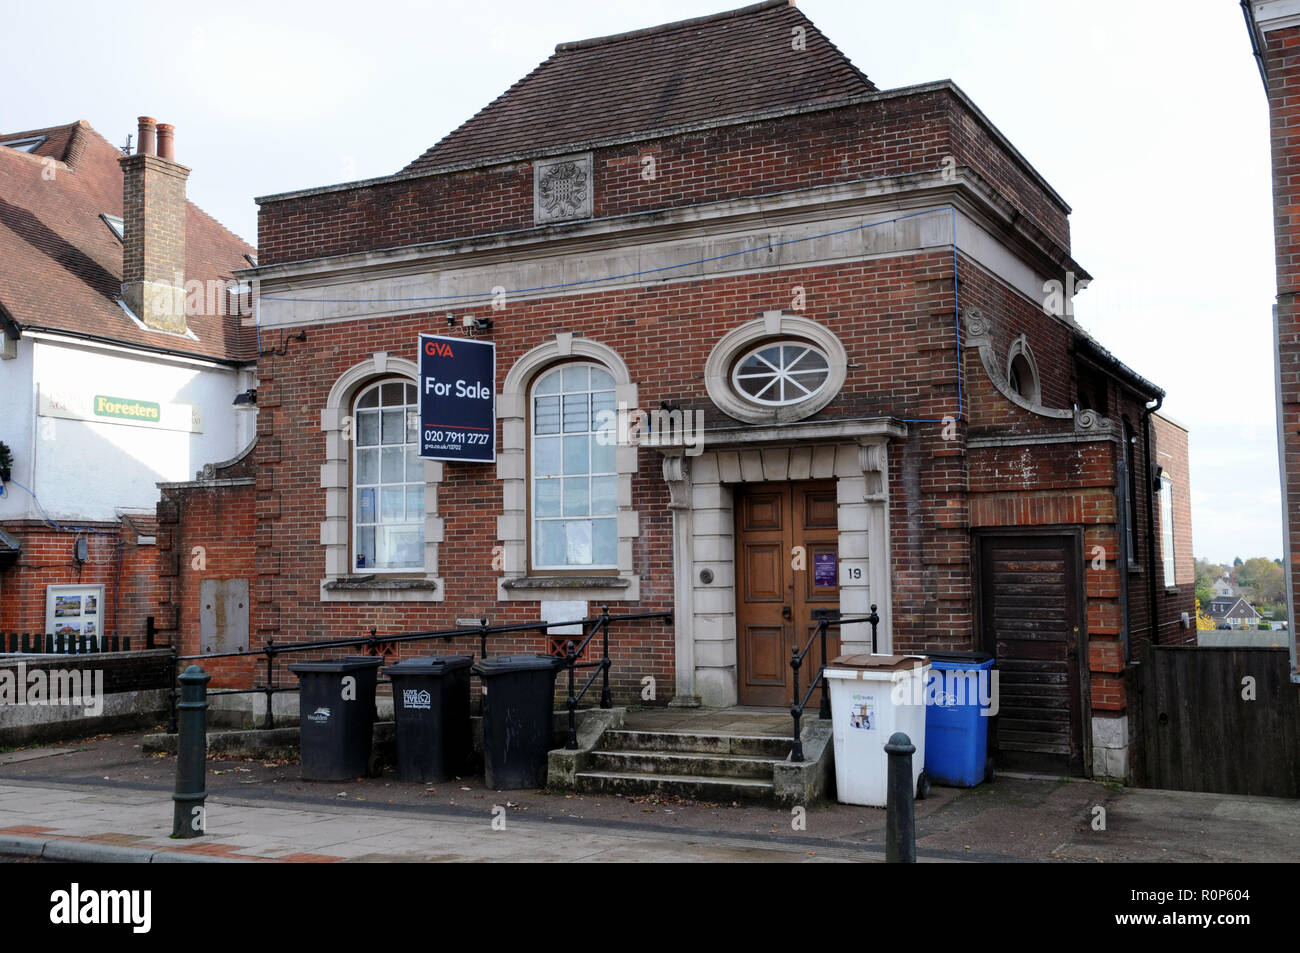 An empty building seeking a buyer in the market town of Heathfield East Sussex. Until June 2018 it was a branch of the Natwest Bank. Stock Photo